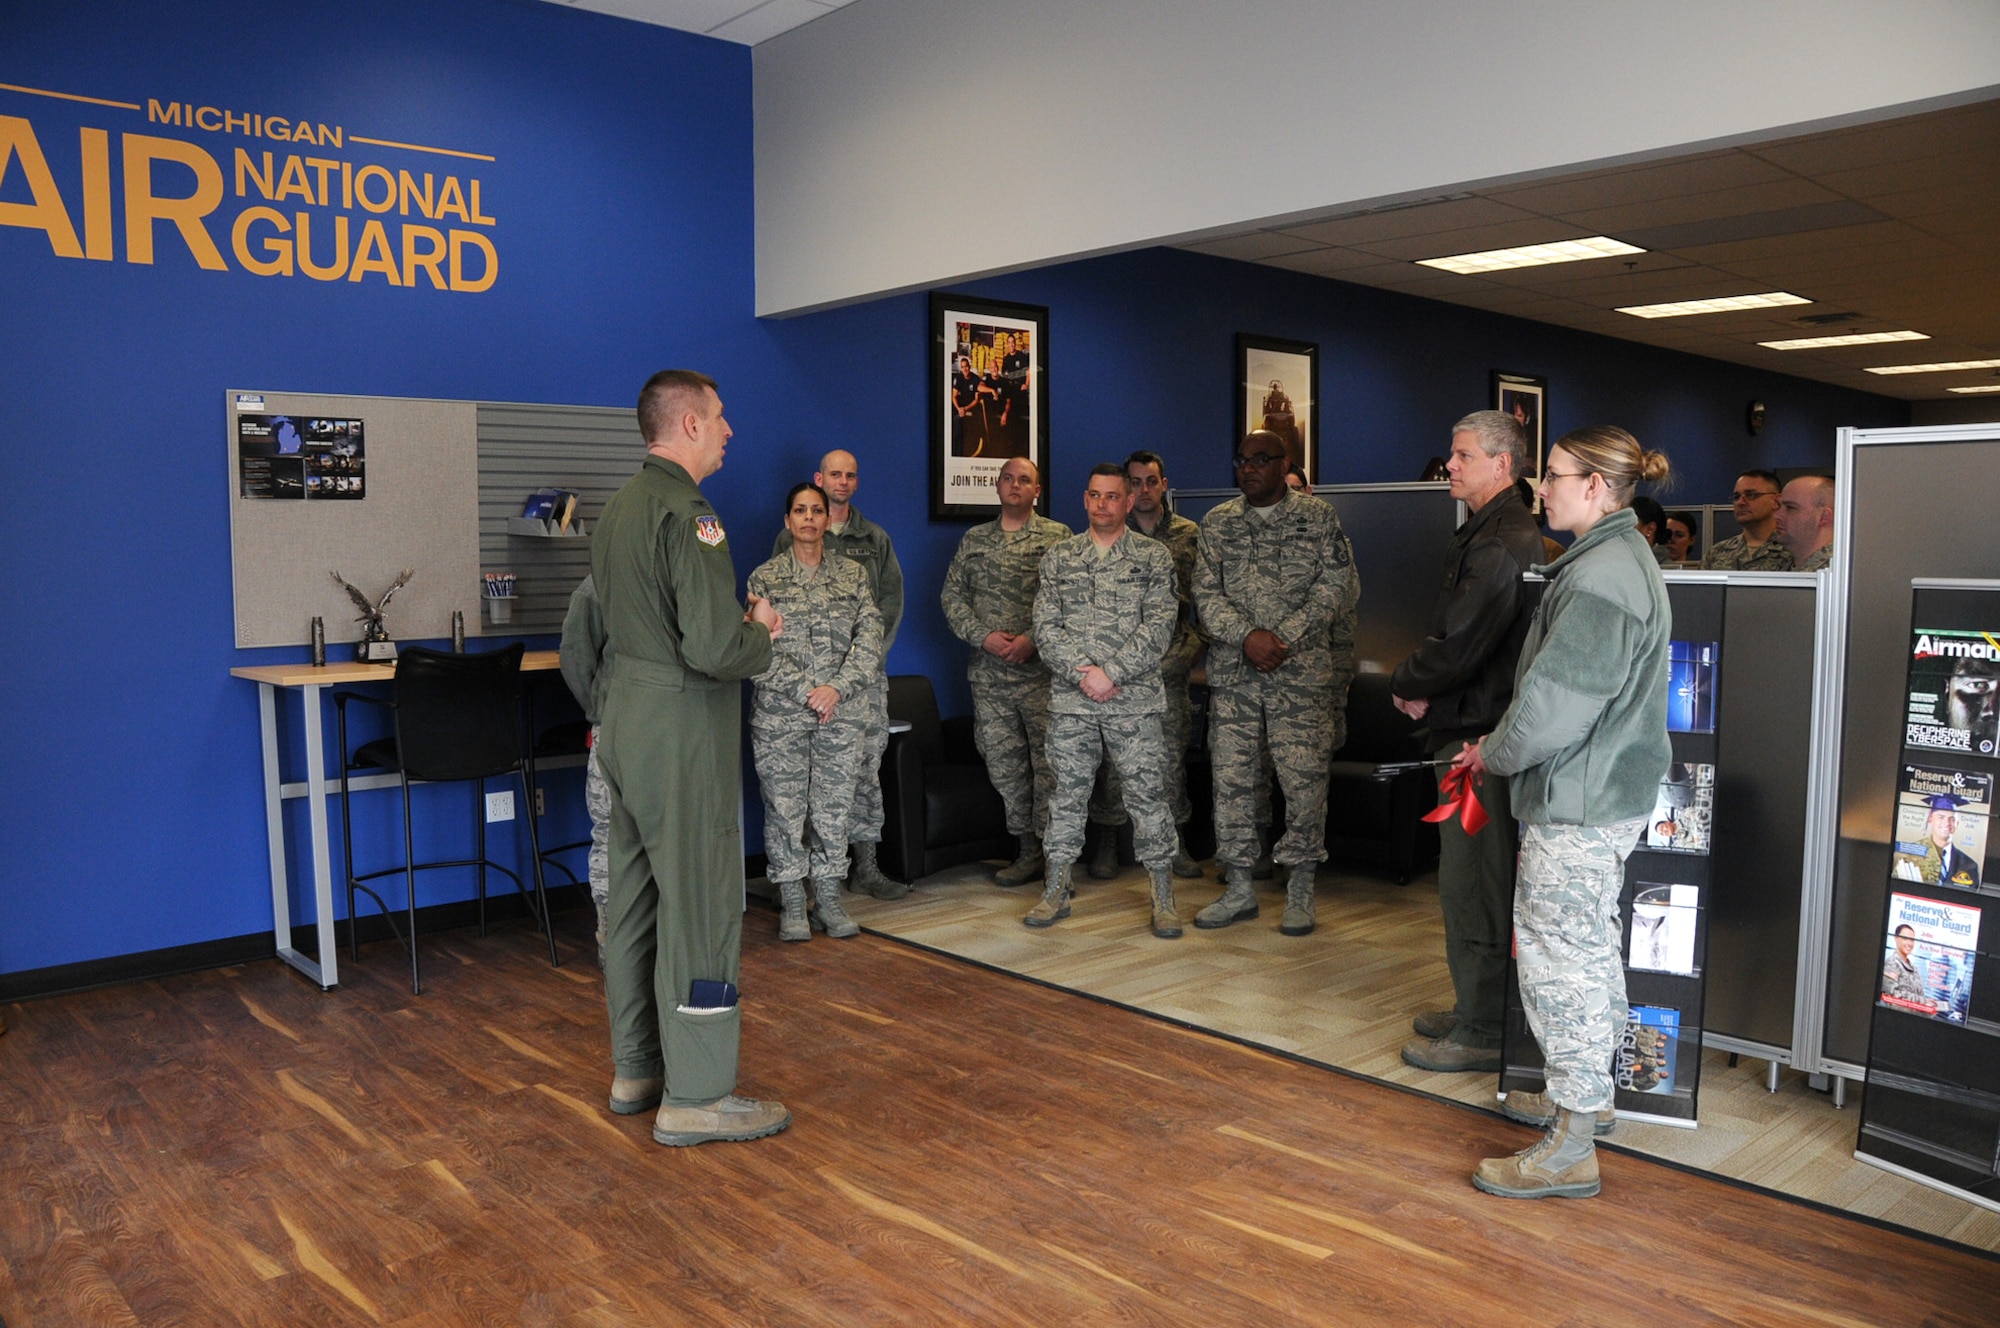 Members of the 110th Airlift Wing, Michigan Air National Guard take part in a ribbon cutting ceremony for the new Air National Guard Career Center and Recruiting Office located in The Shoppes on Stadium in Kalamazoo, Mich., February 22, 2014.  The recruiting station educates applicants who are considering the option of military service in the Air National Guard. (U.S. Air National Guard photo by Master Sgt. Sonia Pawloski/Released)